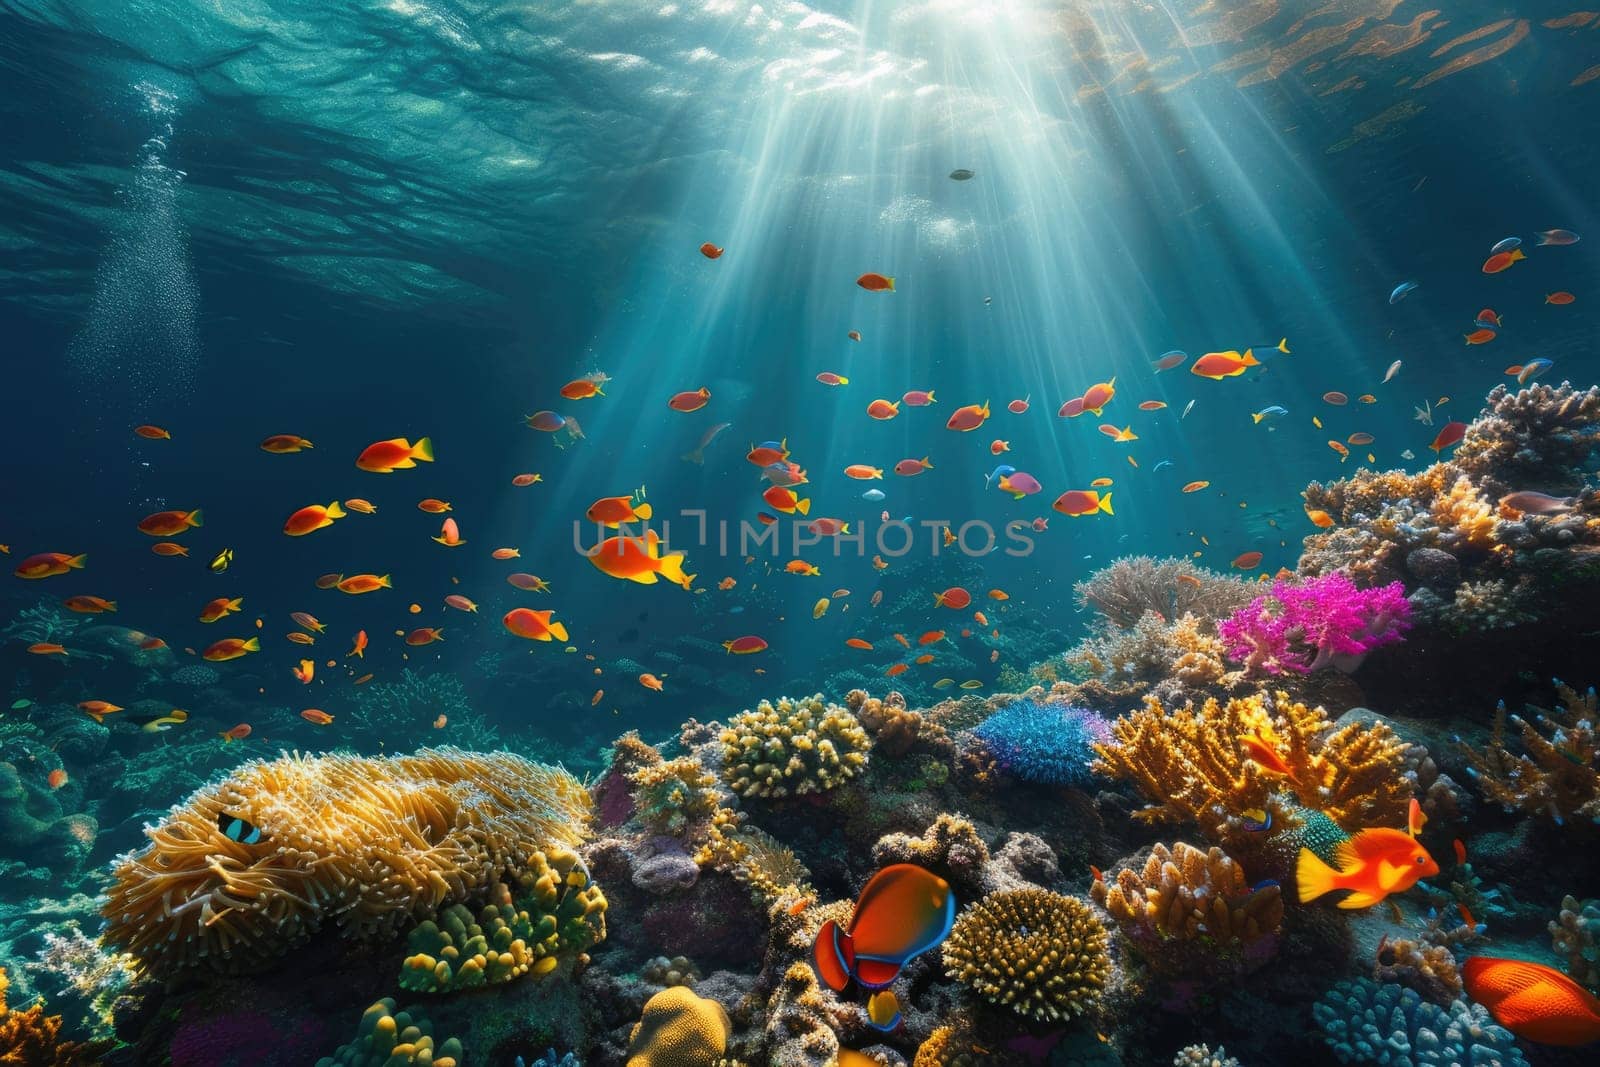 An underwater coral reef scene, diverse marine life. Resplendent. by biancoblue